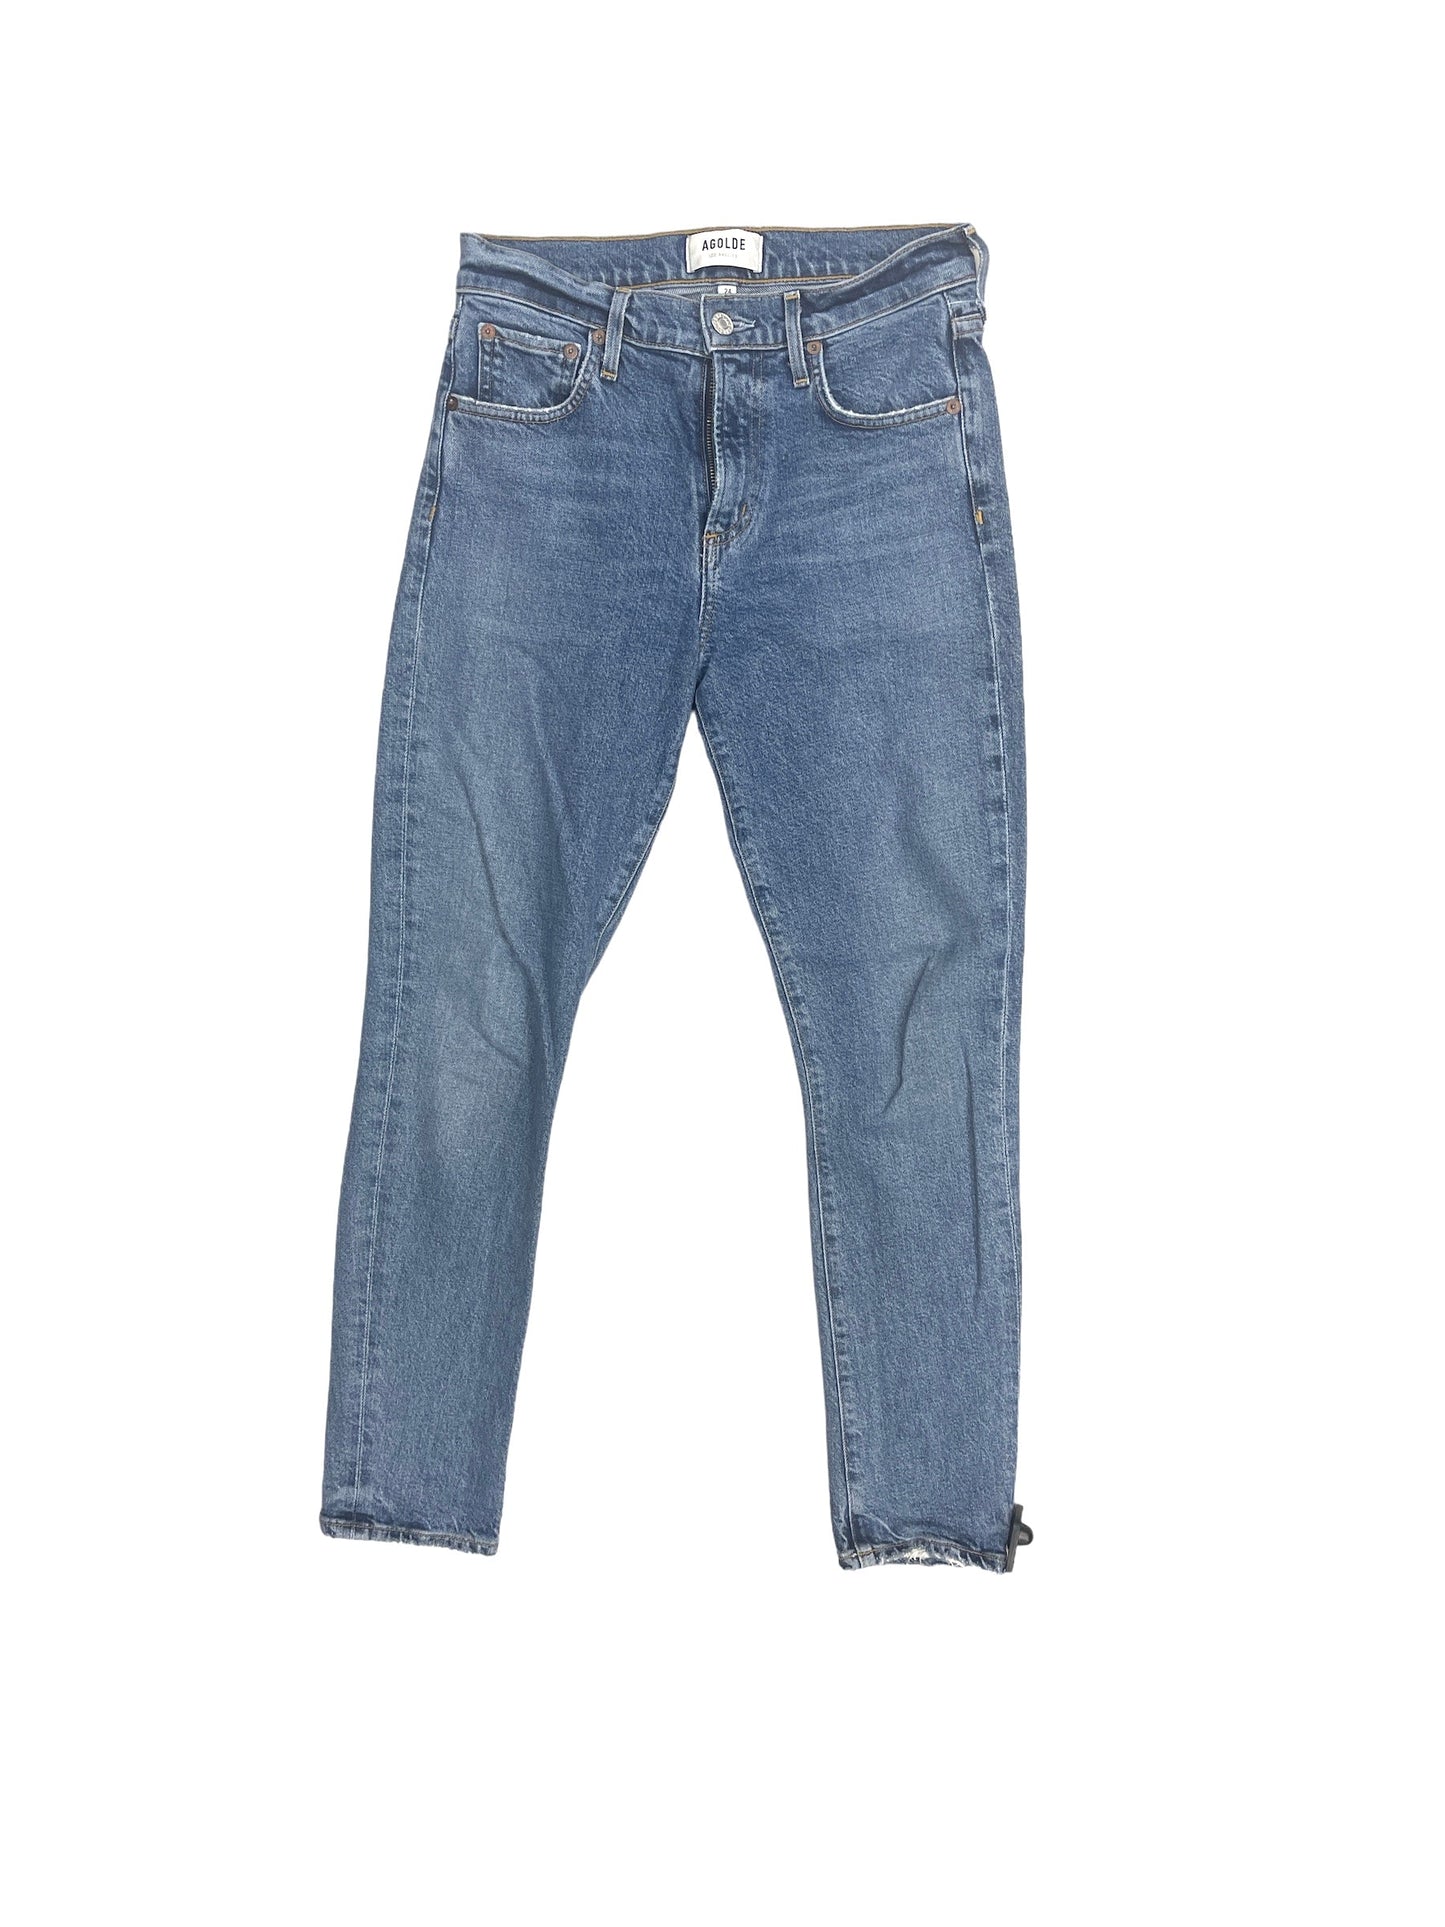 Jeans Straight By Agolde  Size: 24